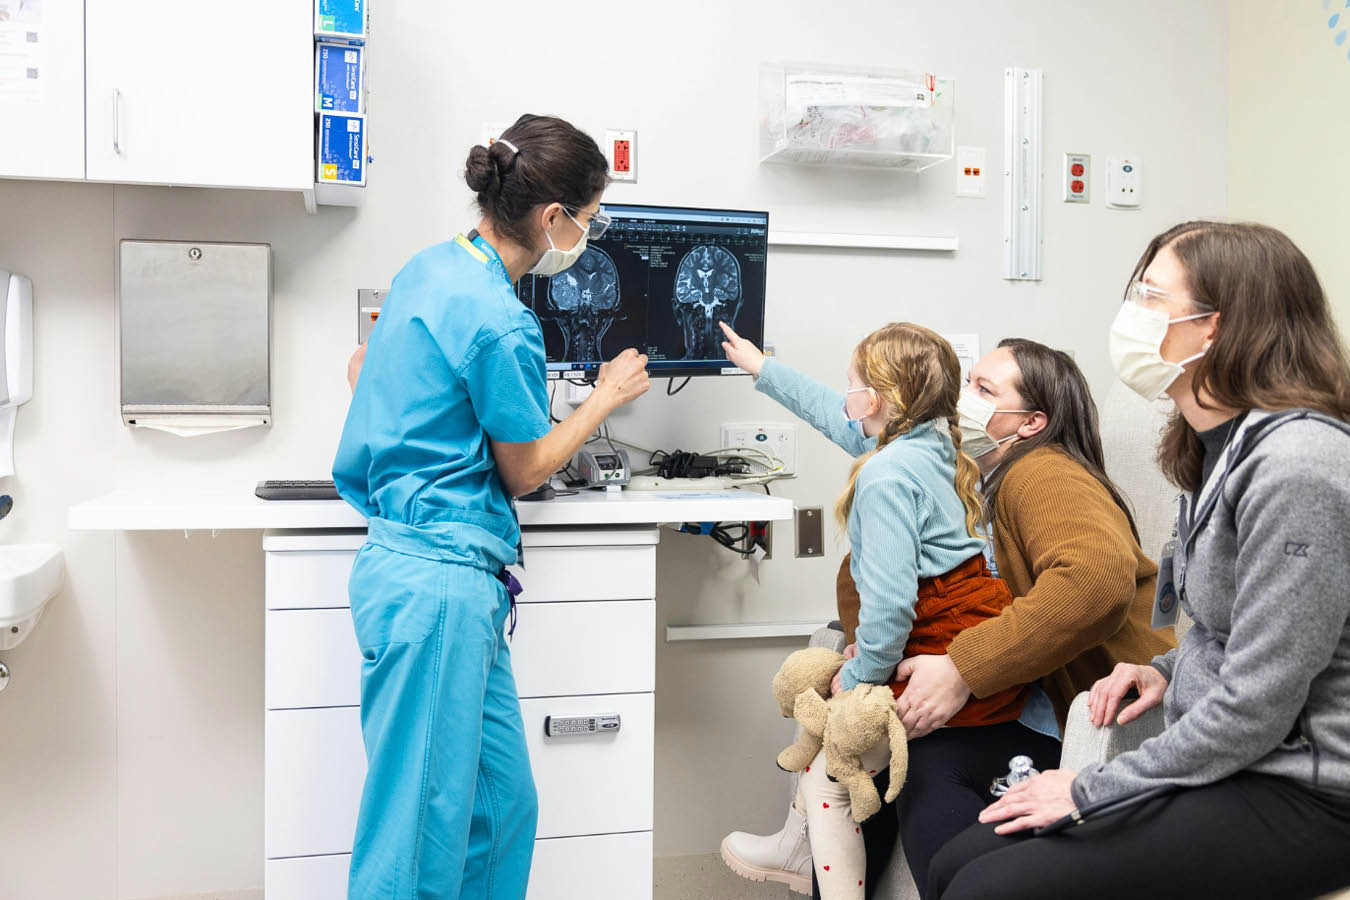 Seattle Children's Dr. Sarah Leary points to a scan of a patient's brain while the patient's family looks on